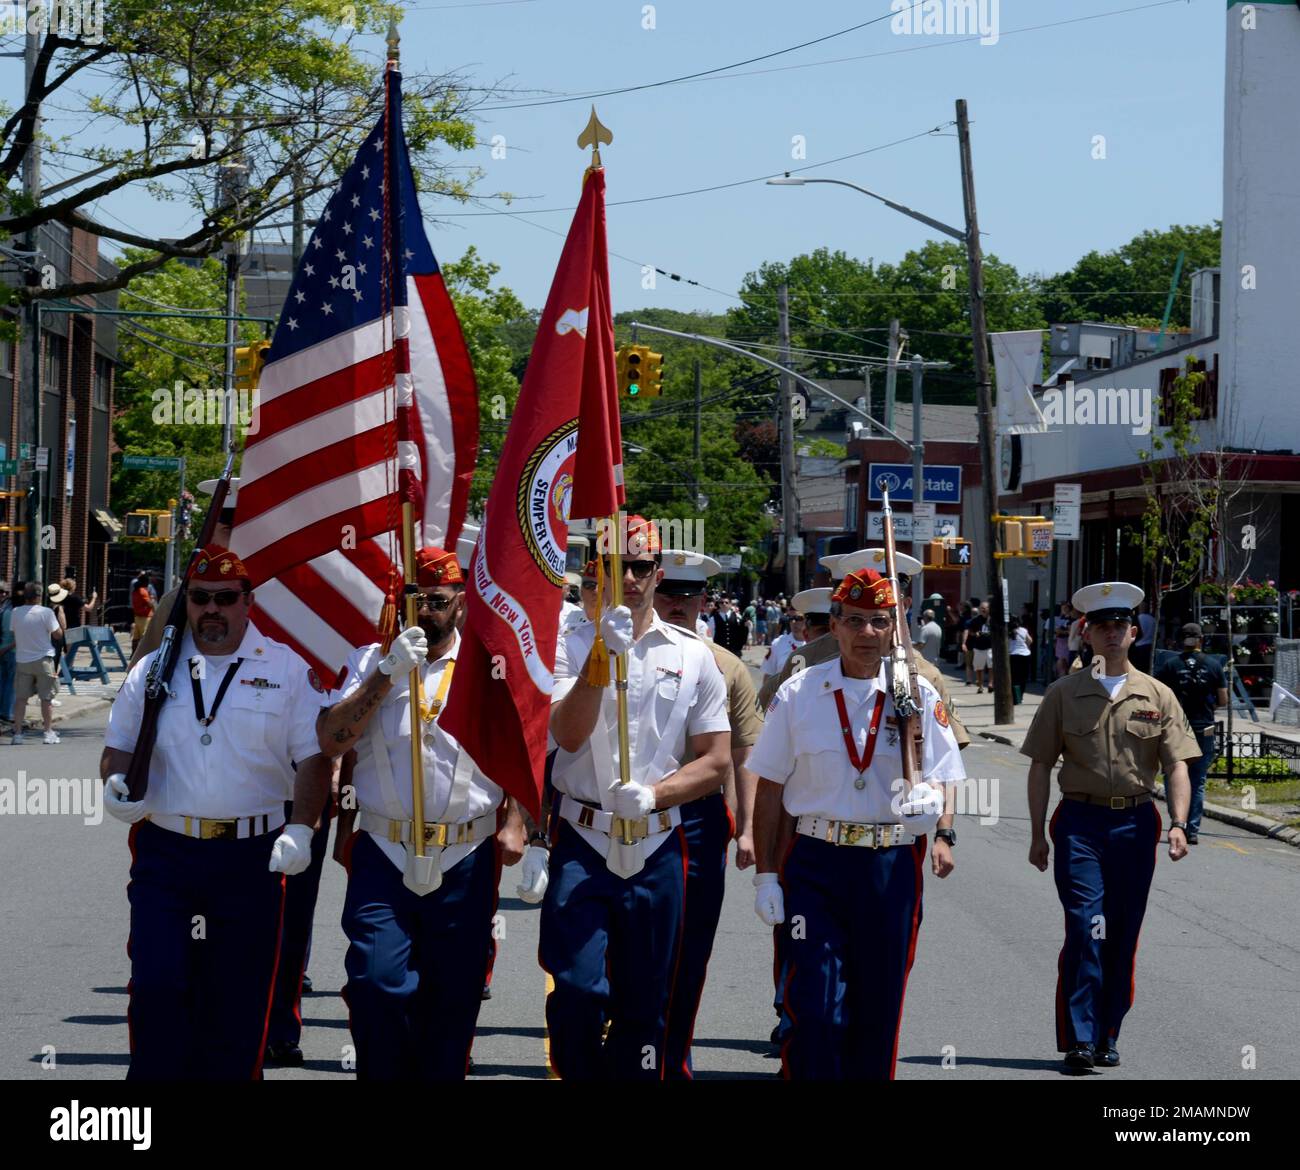 NEW YORK(MAY 30,2022) U.S. Marine Corps veterans from the Staten Island Marine Corps League Detachment 264 lead active duty Marines of the Medium Tiltrotor Squadron (VMM) 162 unit assigned to the amphibious assault ship USS Bataan (LHD 5), participate in a Memorial Day Parade through a Staten Island community during Fleet Week. Fleet Week New York, now in its 34th year, is the city’s time-honored celebration of the sea services. It is an unparalleled opportunity for the citizens of New York and the surrounding tri-state area to meet Sailors, Marines and Coast Guardsmen, and witness firsthand t Stock Photo